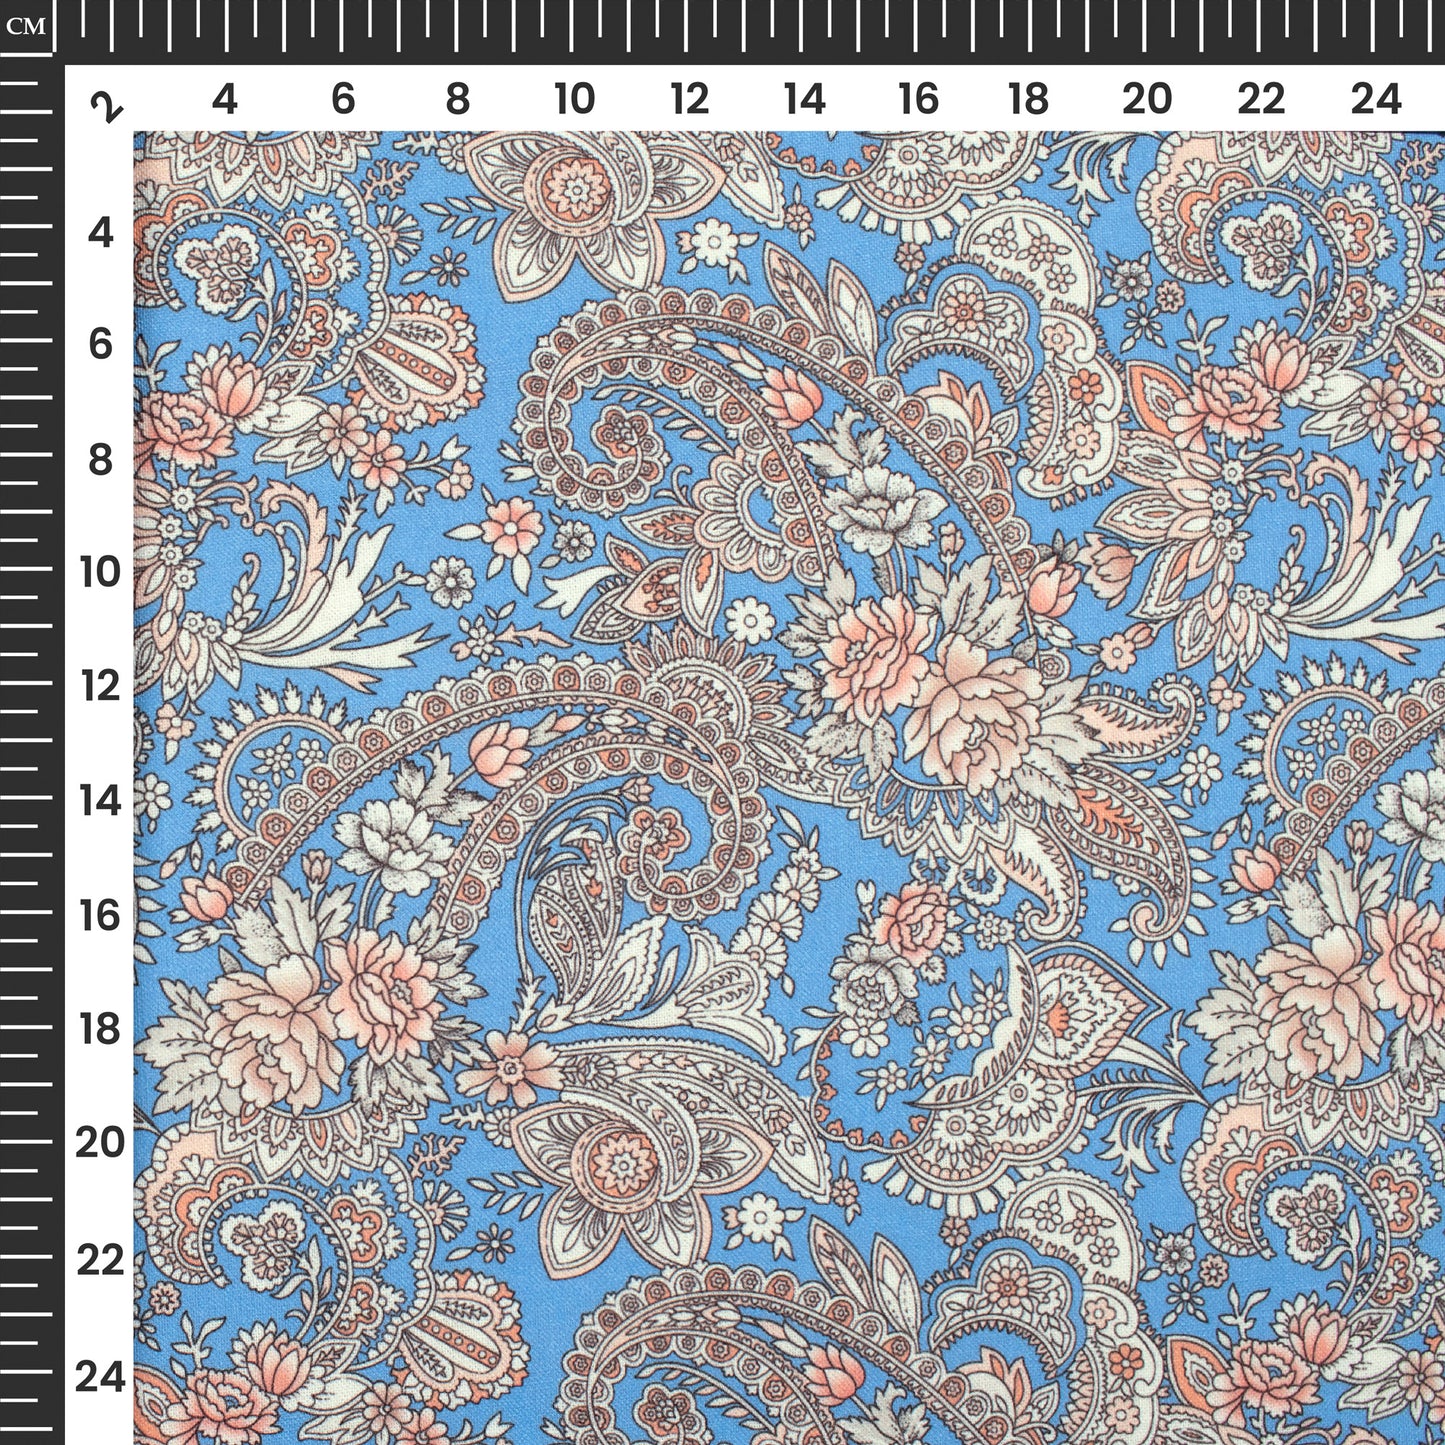 Baby Blue Floral Digital Print Linen Textured Fabric (Width 56 Inches)